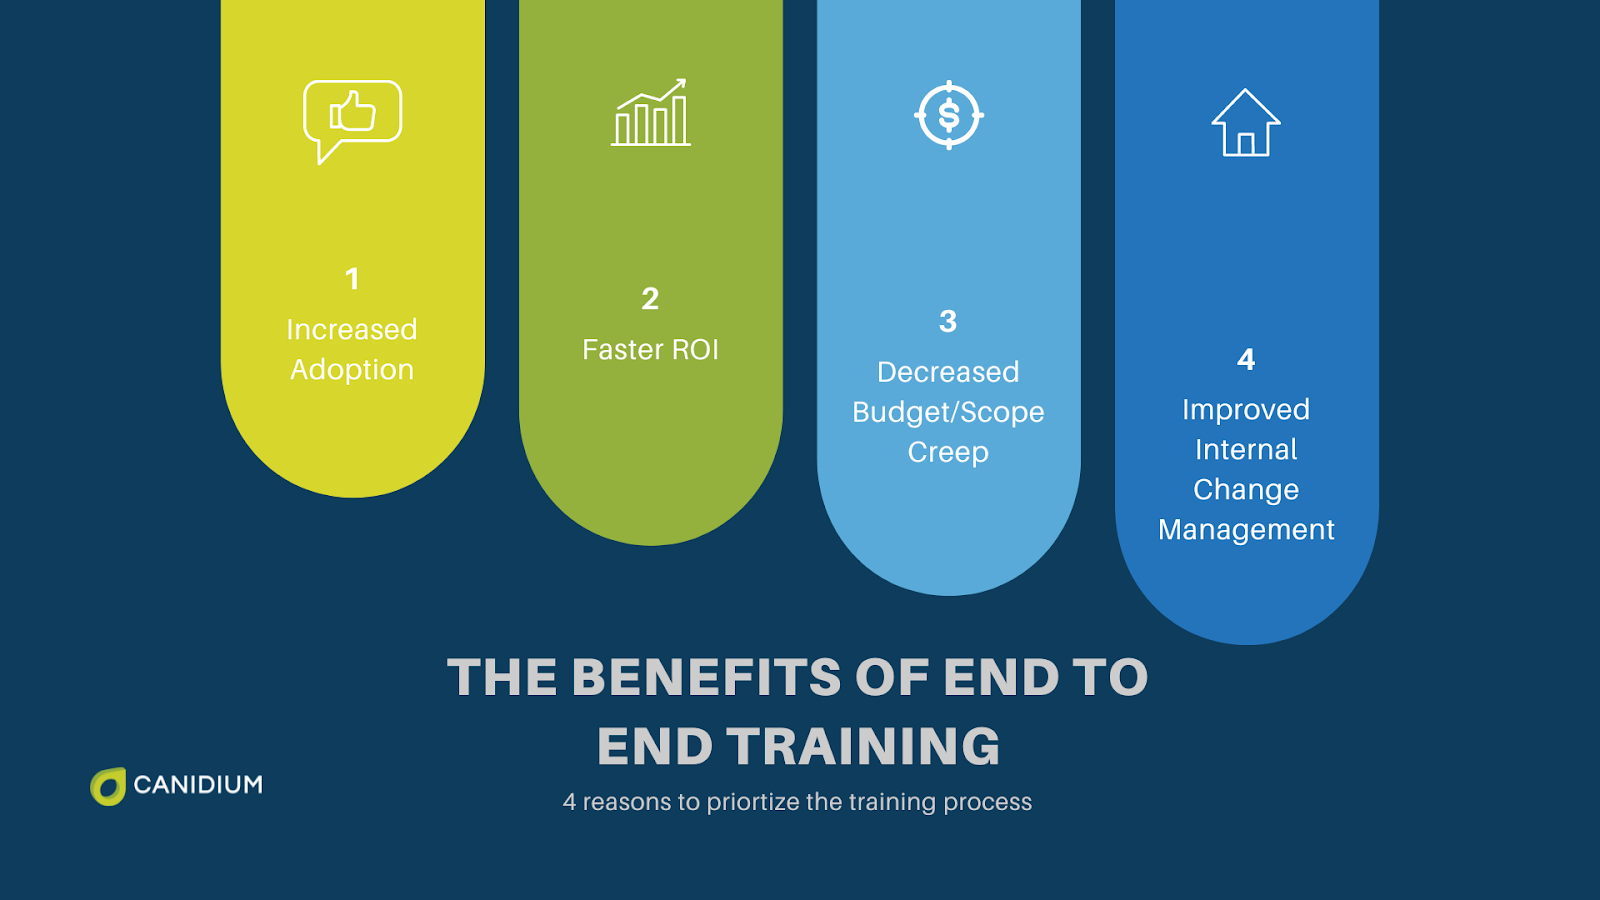 Four Benefits of End-to-End Training